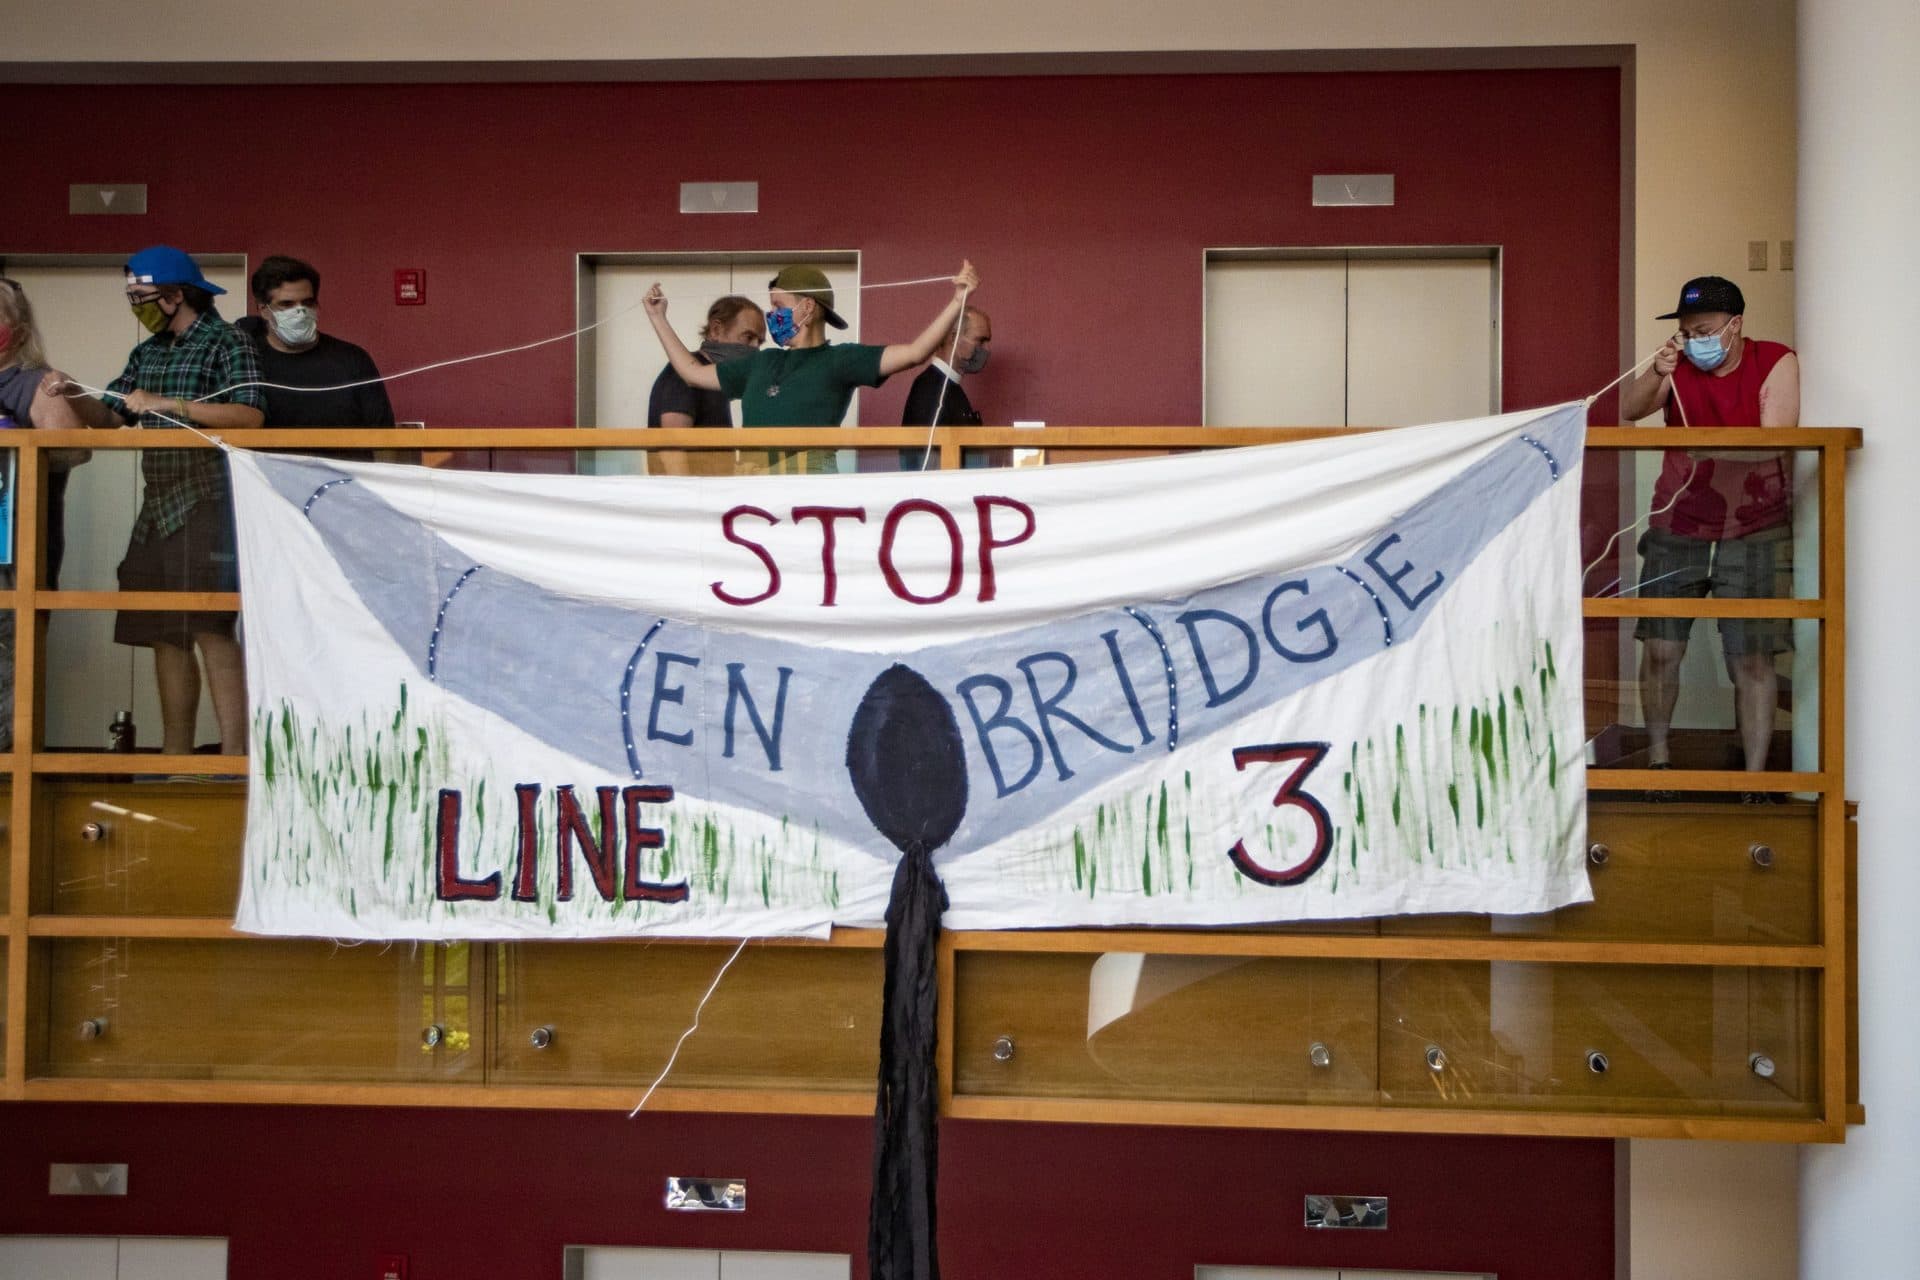 Protesters hang a banner protesting the Line 3 project, a crude oil pipeline replacement in Minnesota. (Jesse Costa/WBUR)